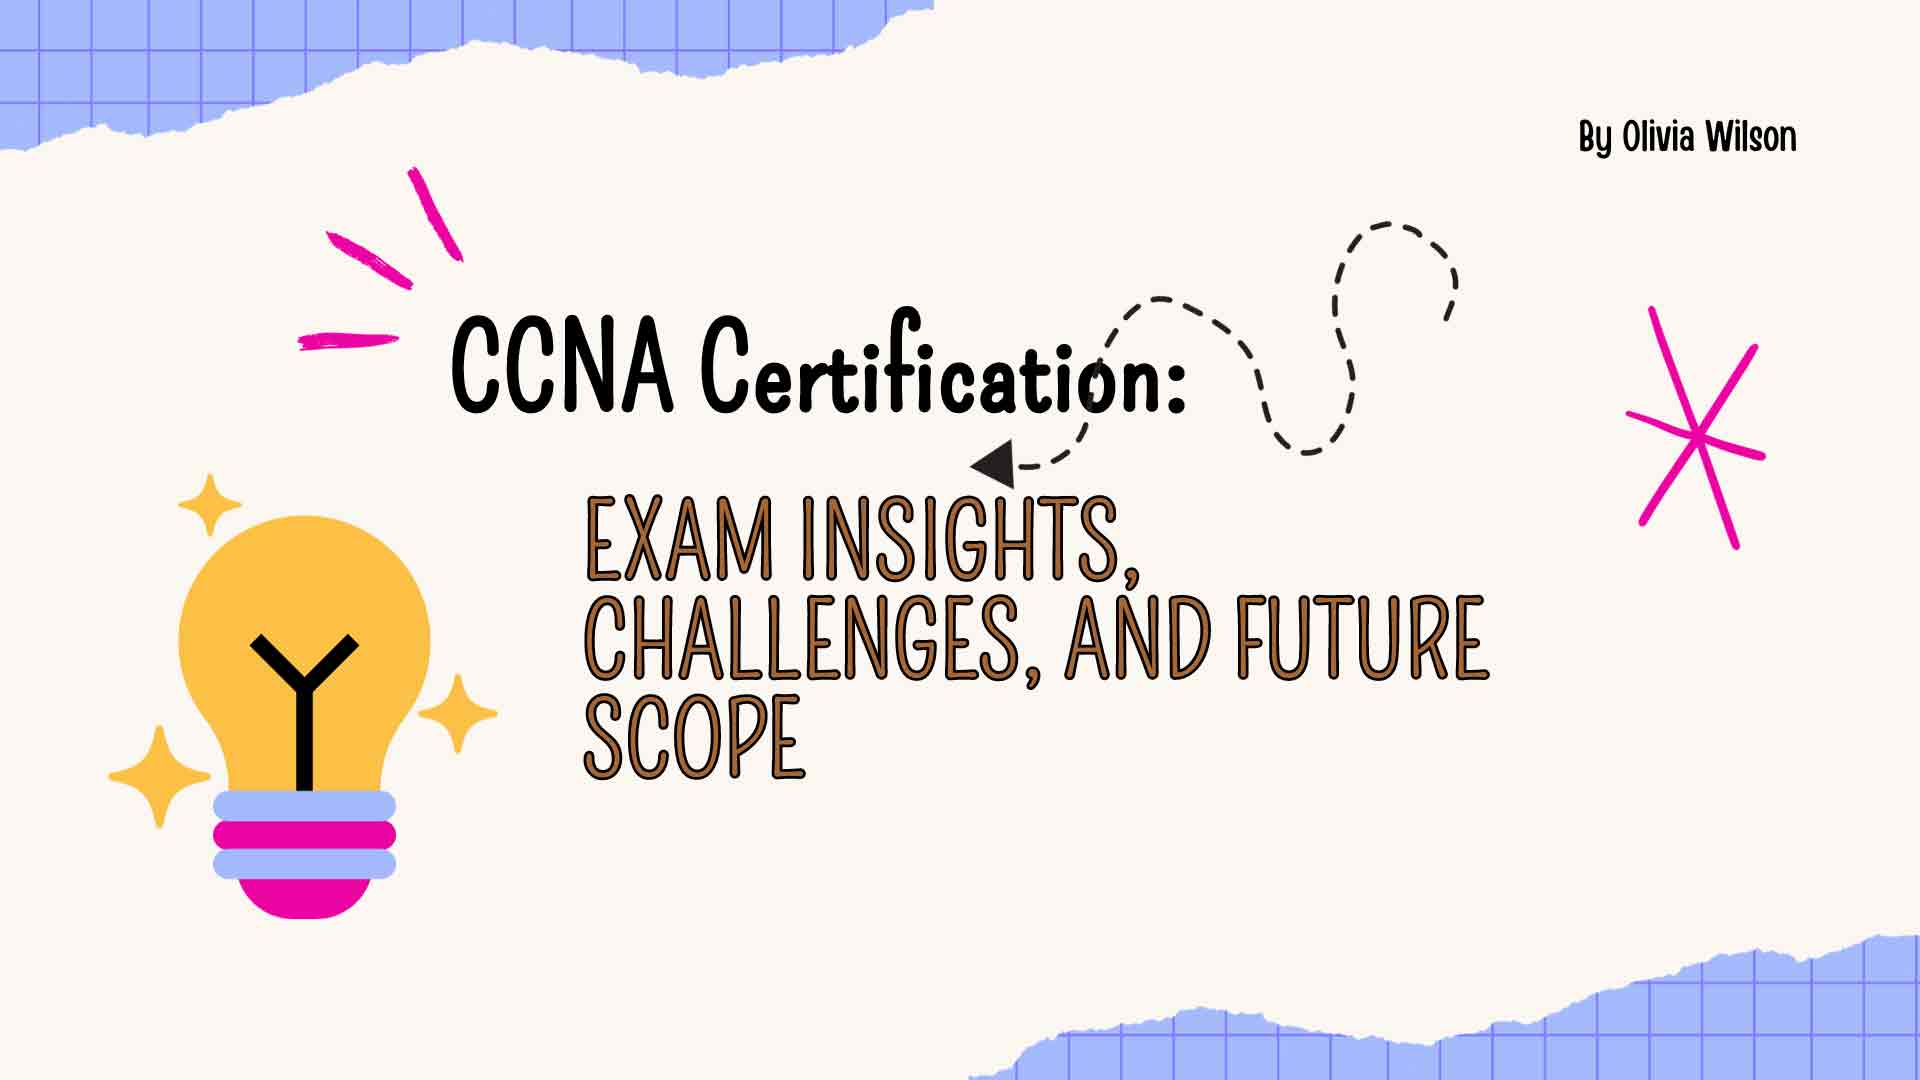 Cisco Certified Network Associate (CCNA) Certification: Exam Insights, Challenges, and Future Scope